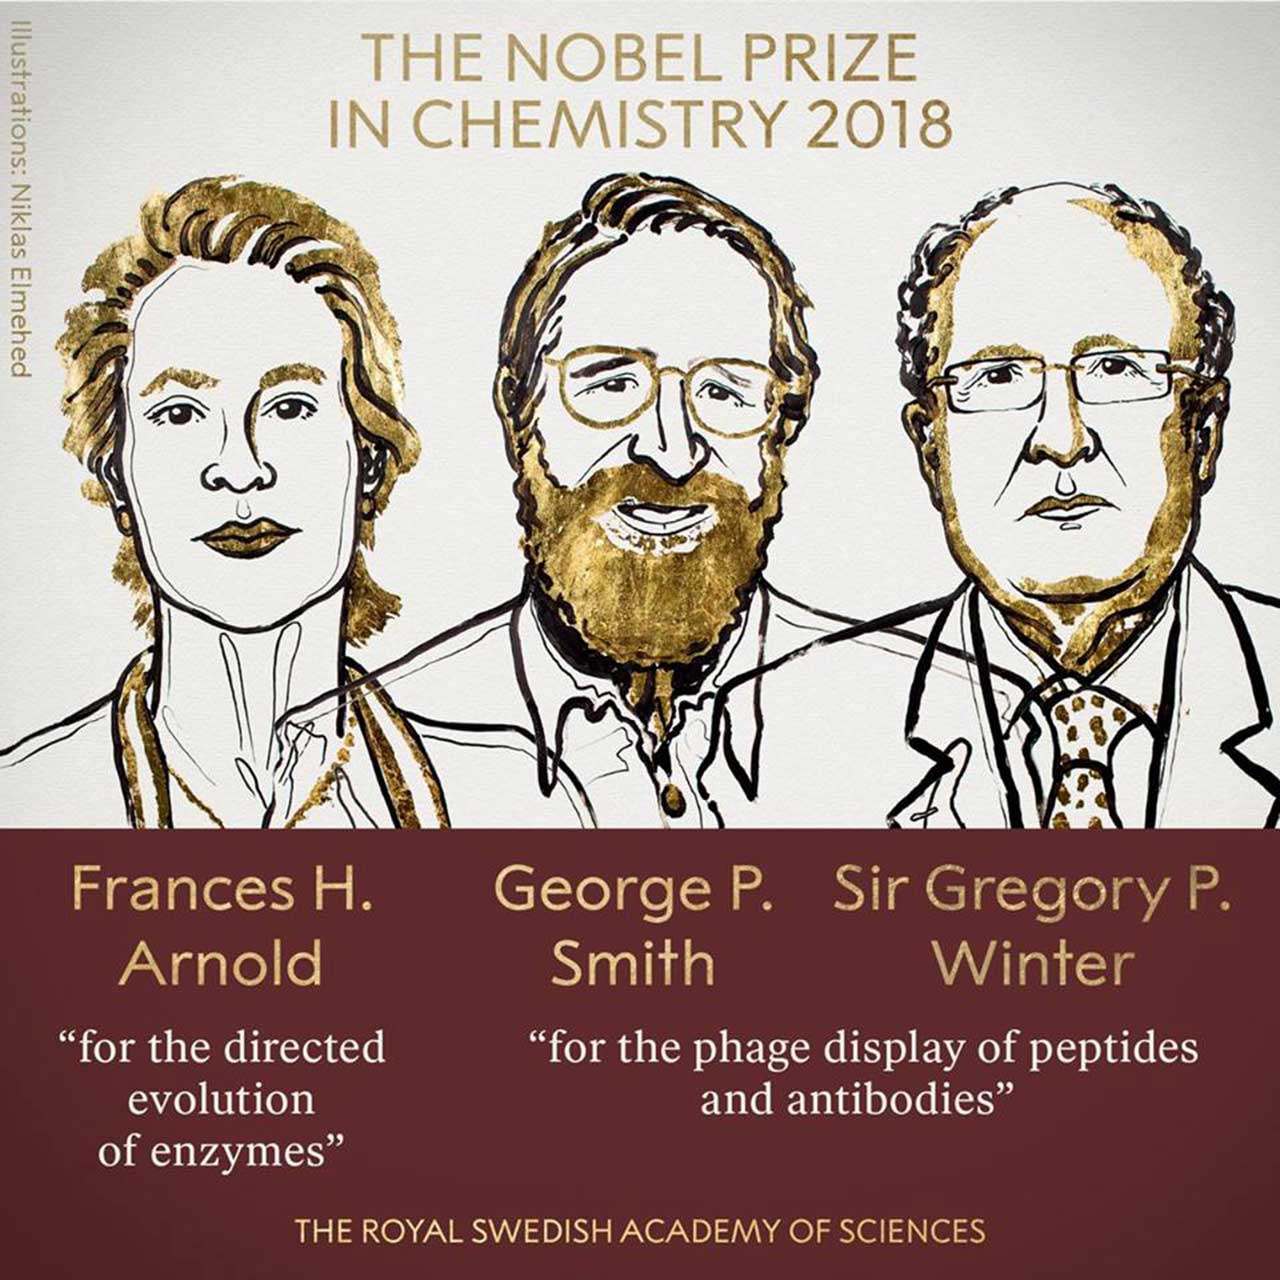 Illustration of the winners of Chemistry Nobel Prize: Frances H. Arnold, George P. Smith and Sir Gregory P. Winter.